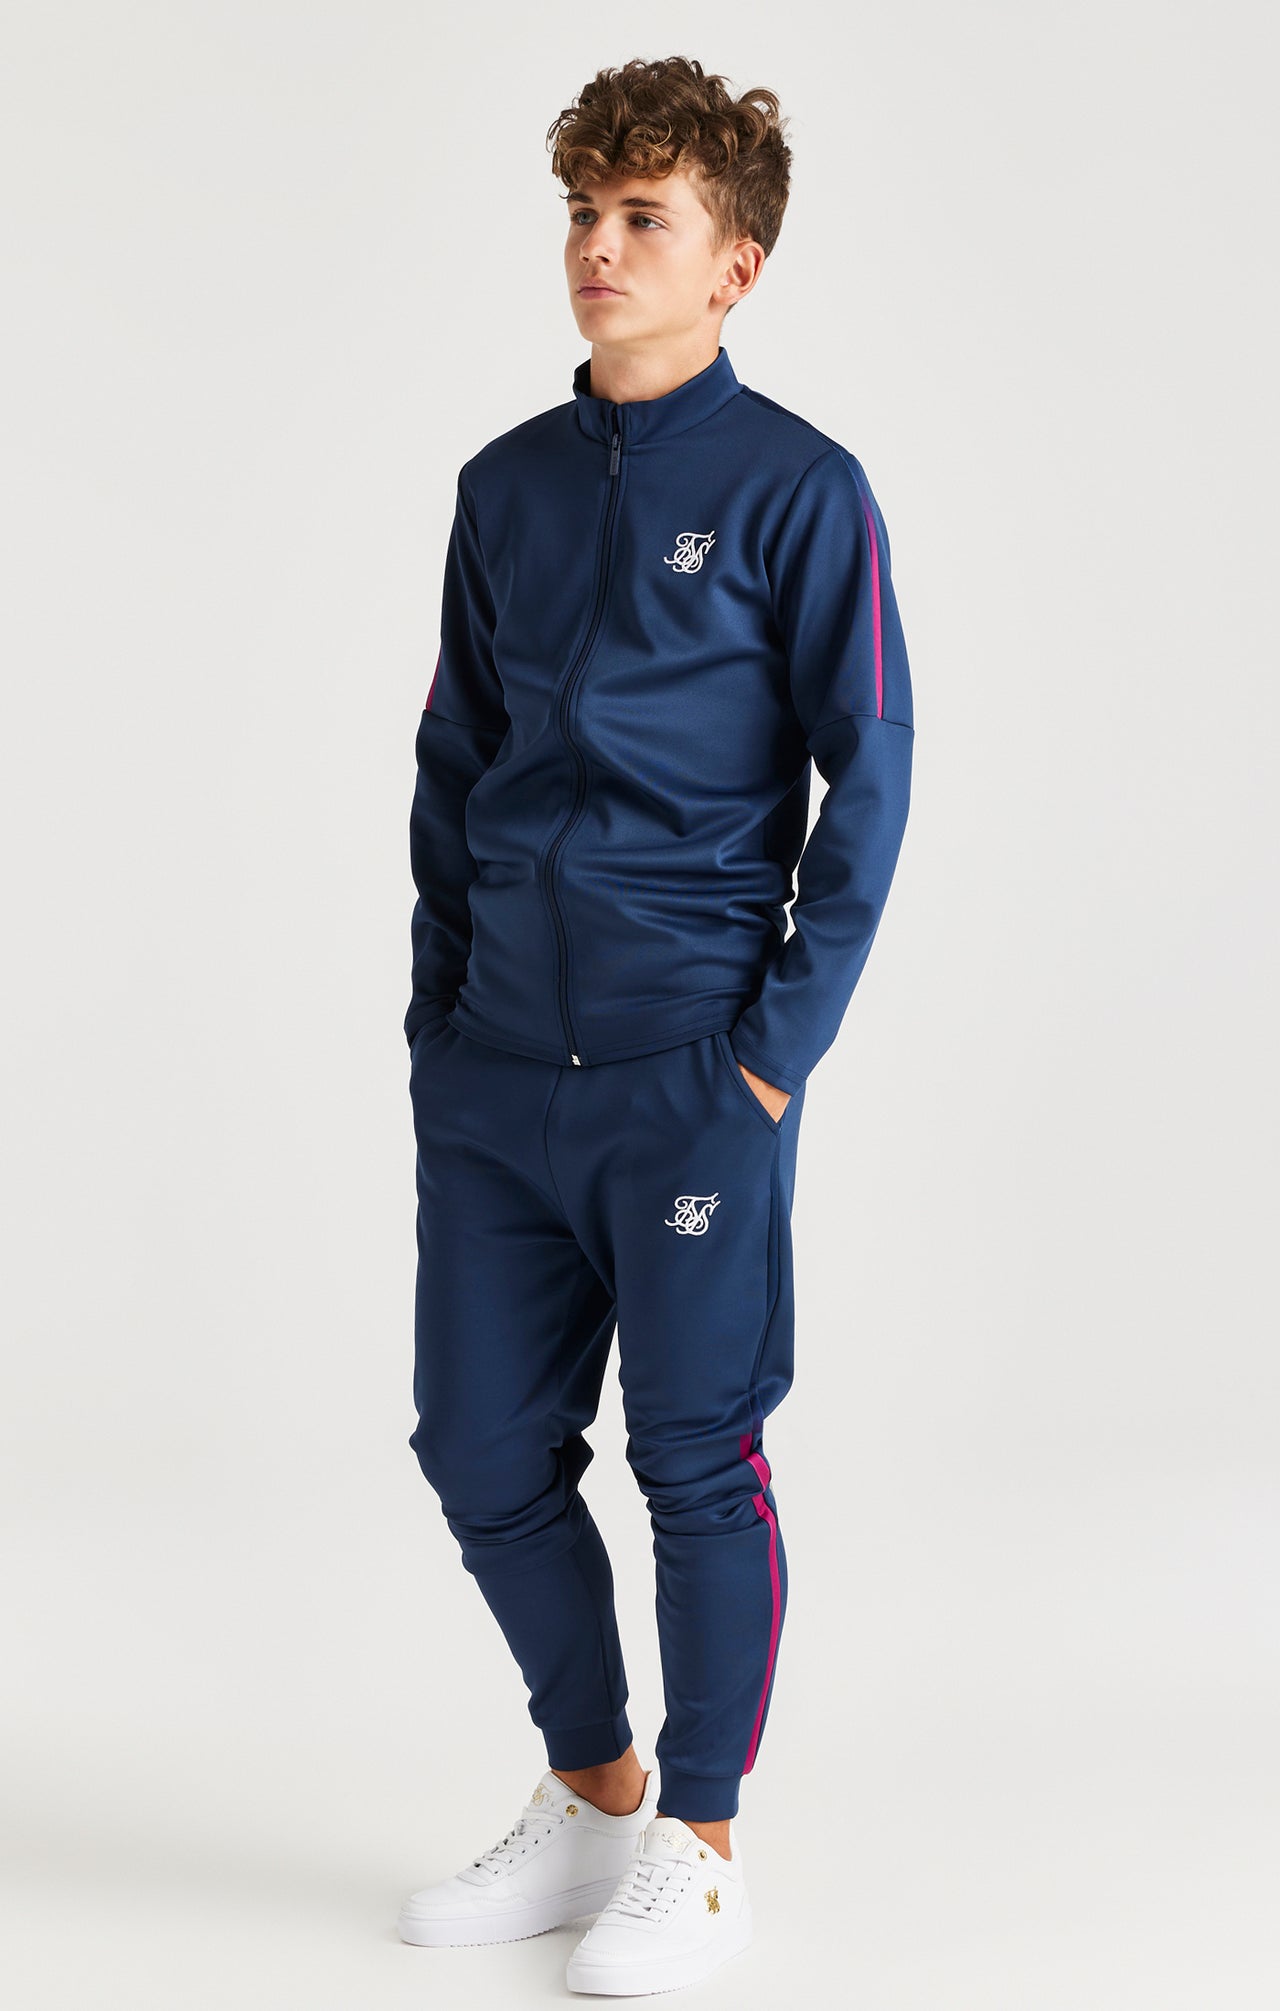 SikSilk Zonal Fade Track Top - Navy (2)